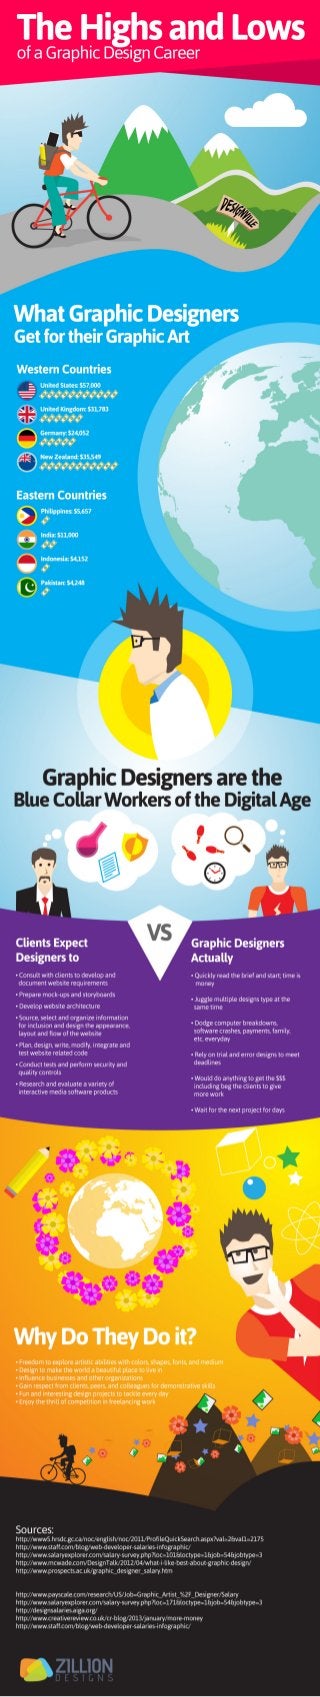 [INFOGRAPHIC]:The Highs and Lows of a Graphic Design Career